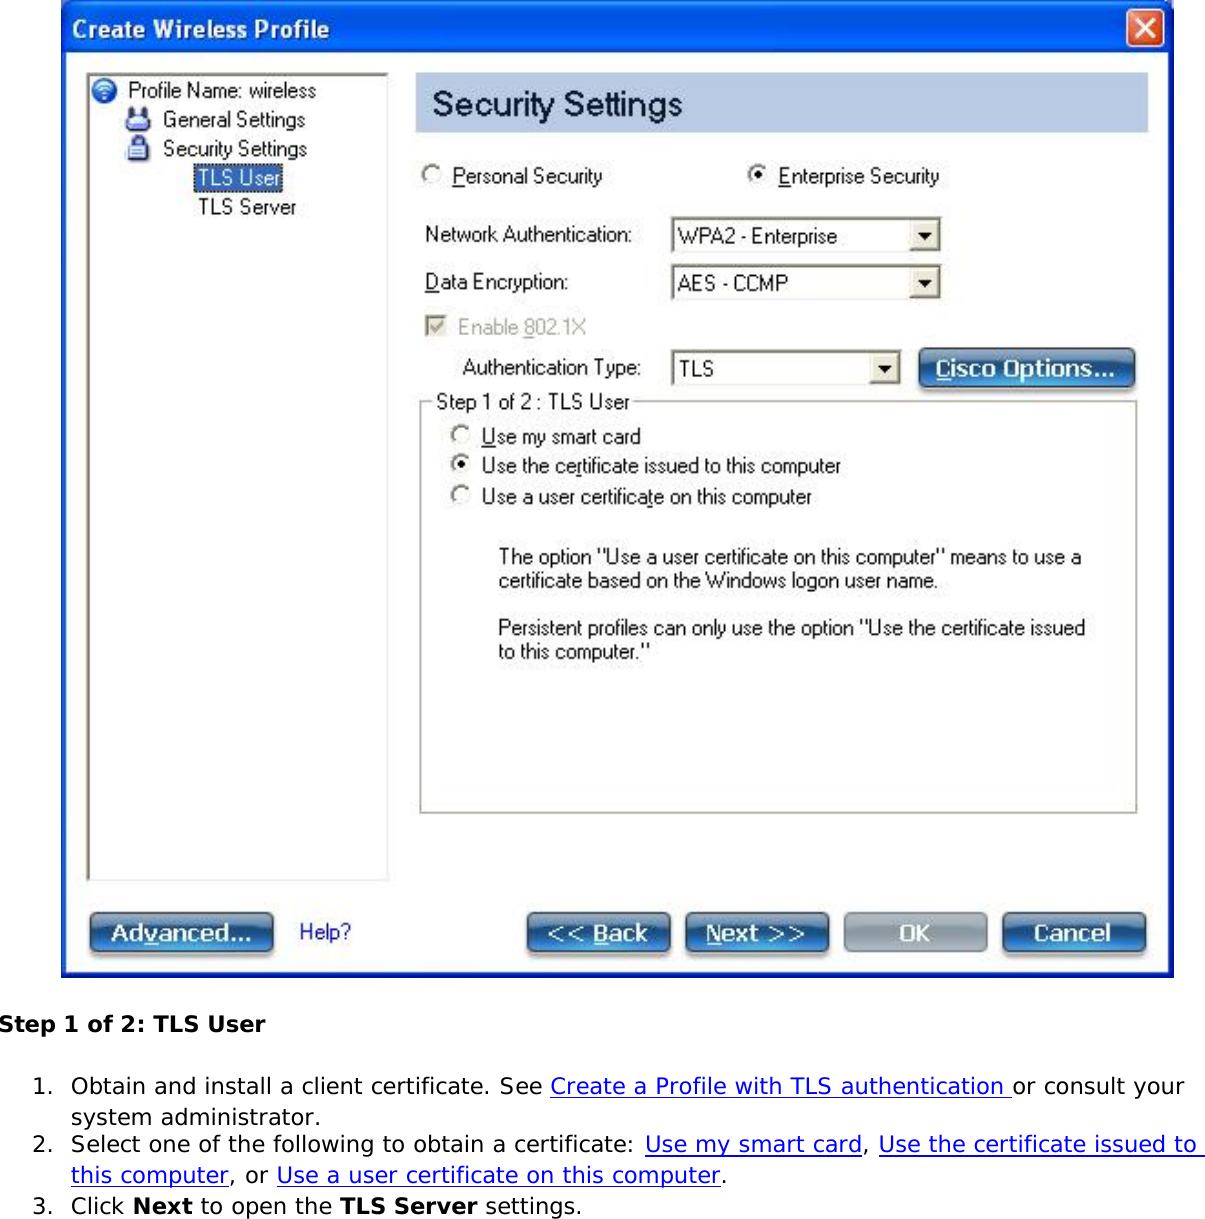 Step 1 of 2: TLS User1.  Obtain and install a client certificate. See Create a Profile with TLS authentication or consult your system administrator.2.  Select one of the following to obtain a certificate: Use my smart card, Use the certificate issued to this computer, or Use a user certificate on this computer.3.  Click Next to open the TLS Server settings.